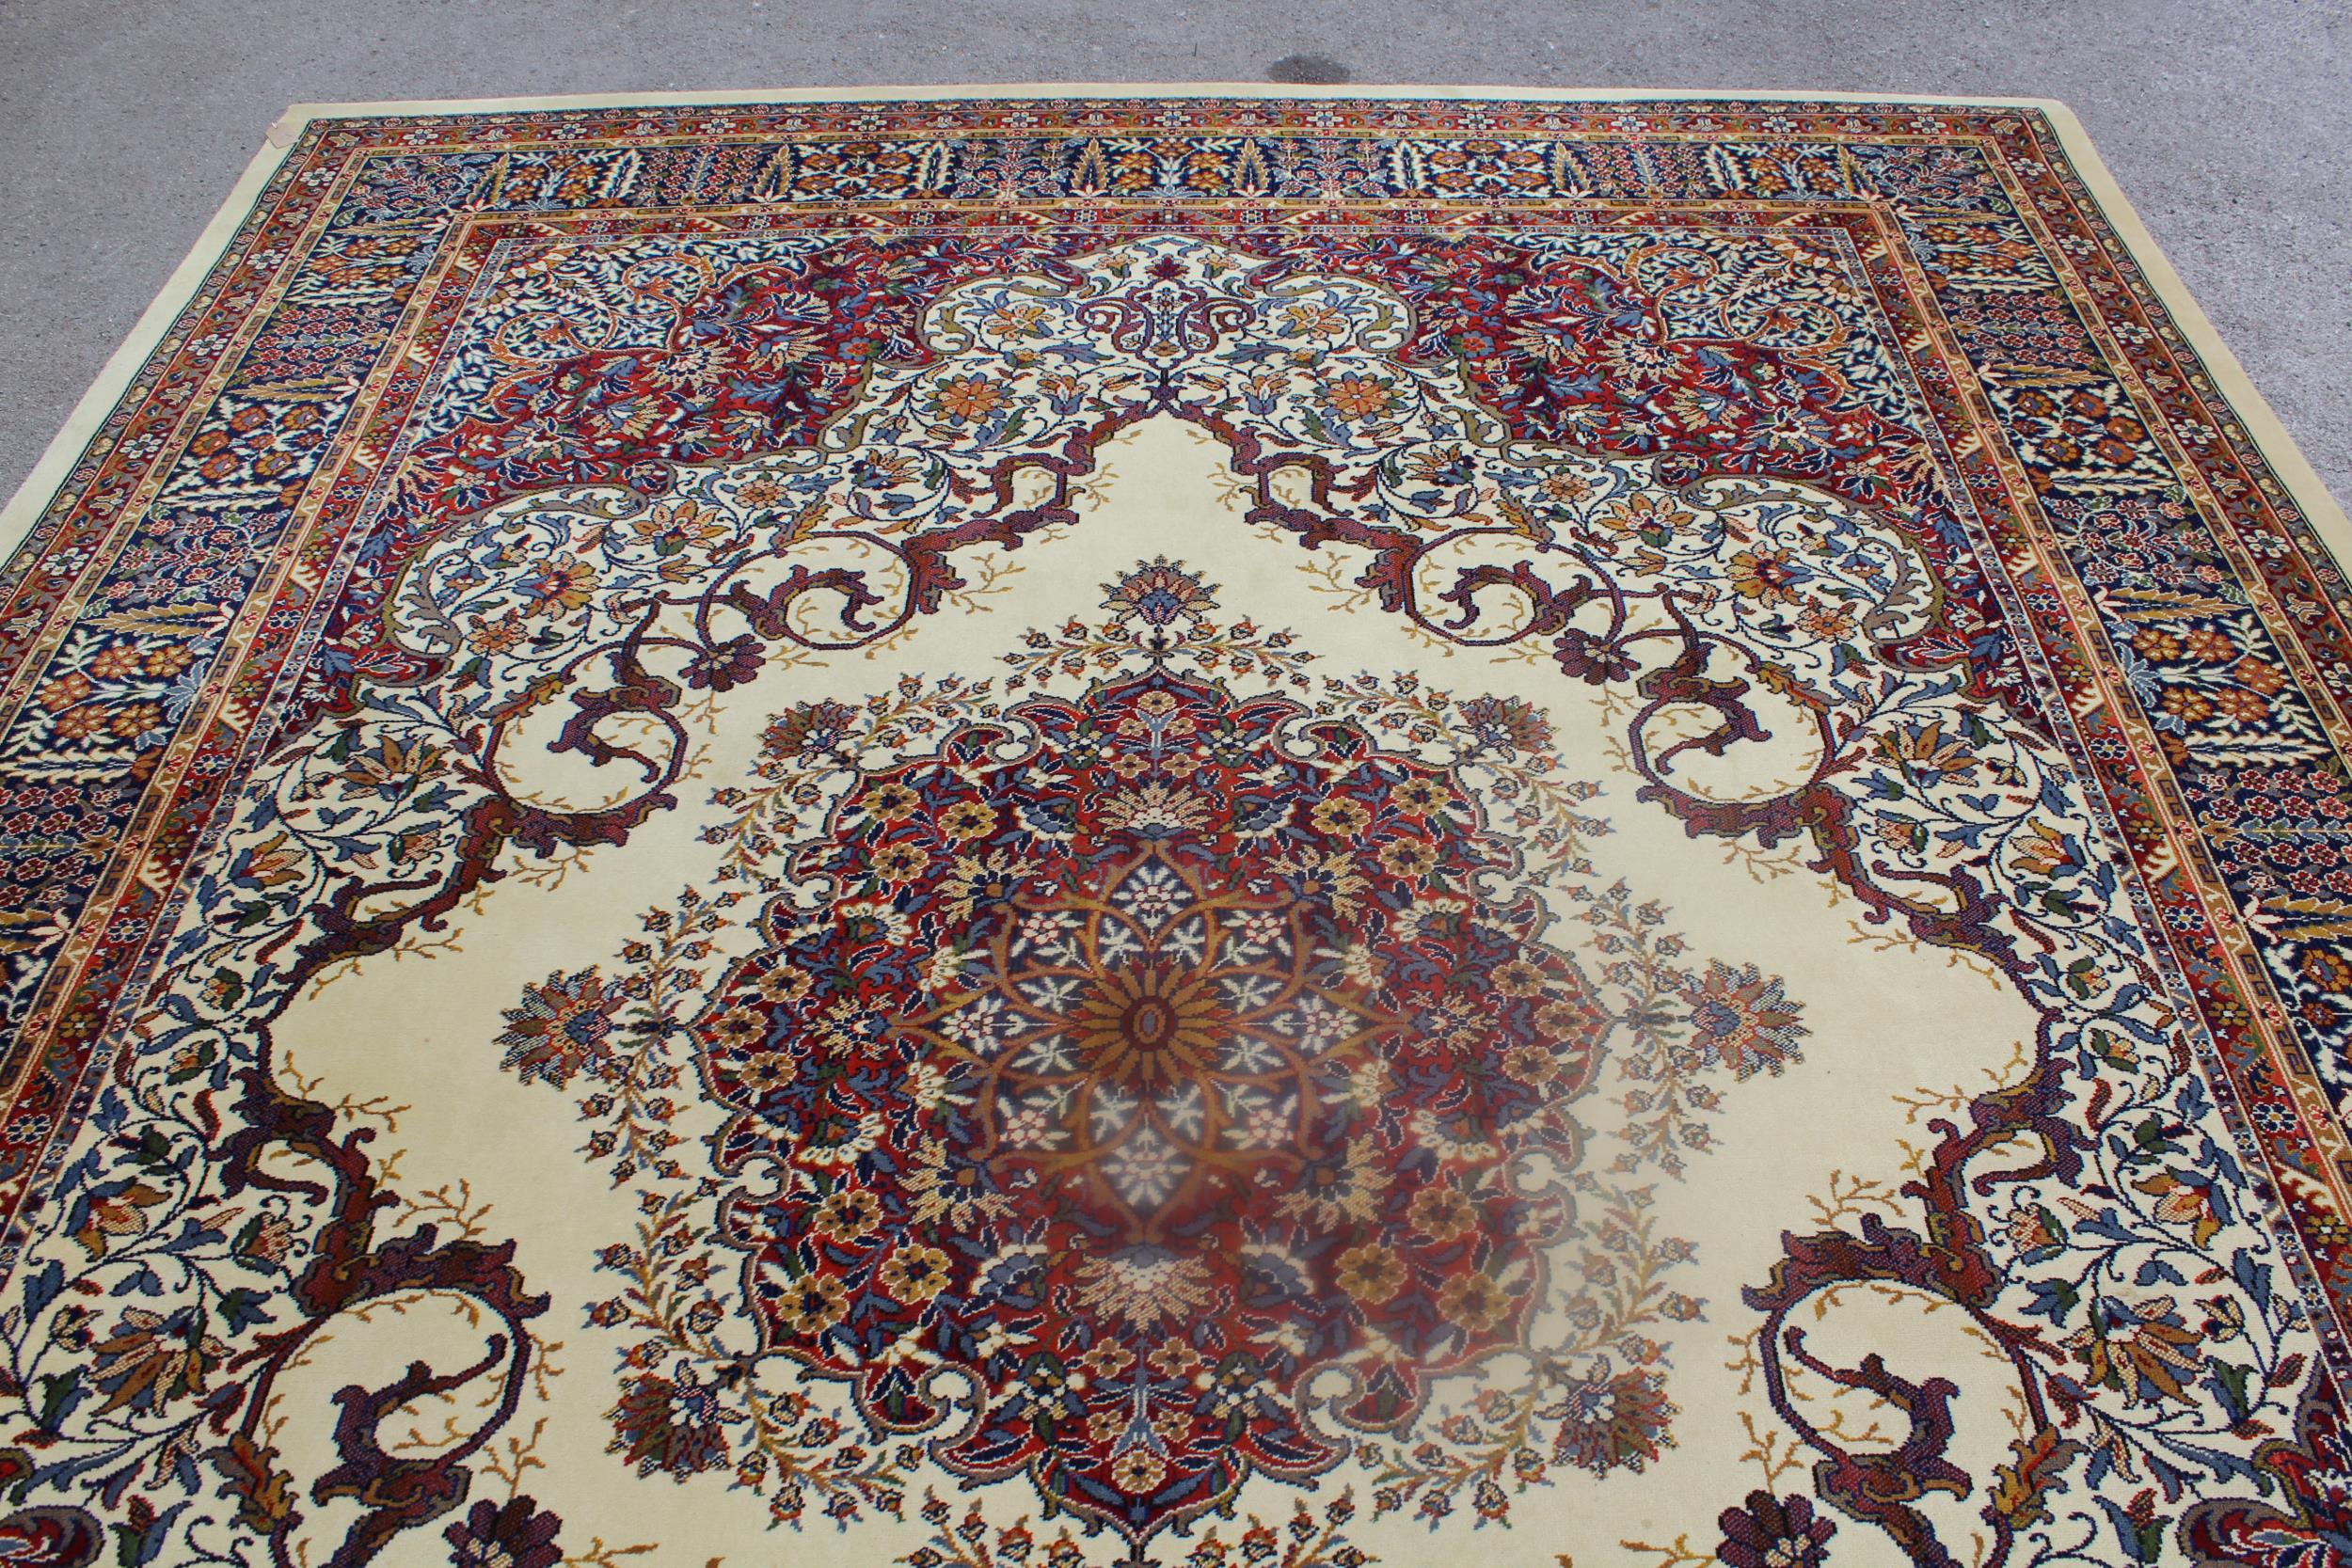 Machine woven Persian design carpet on beige ground, 144ins x 108ins - Image 2 of 4